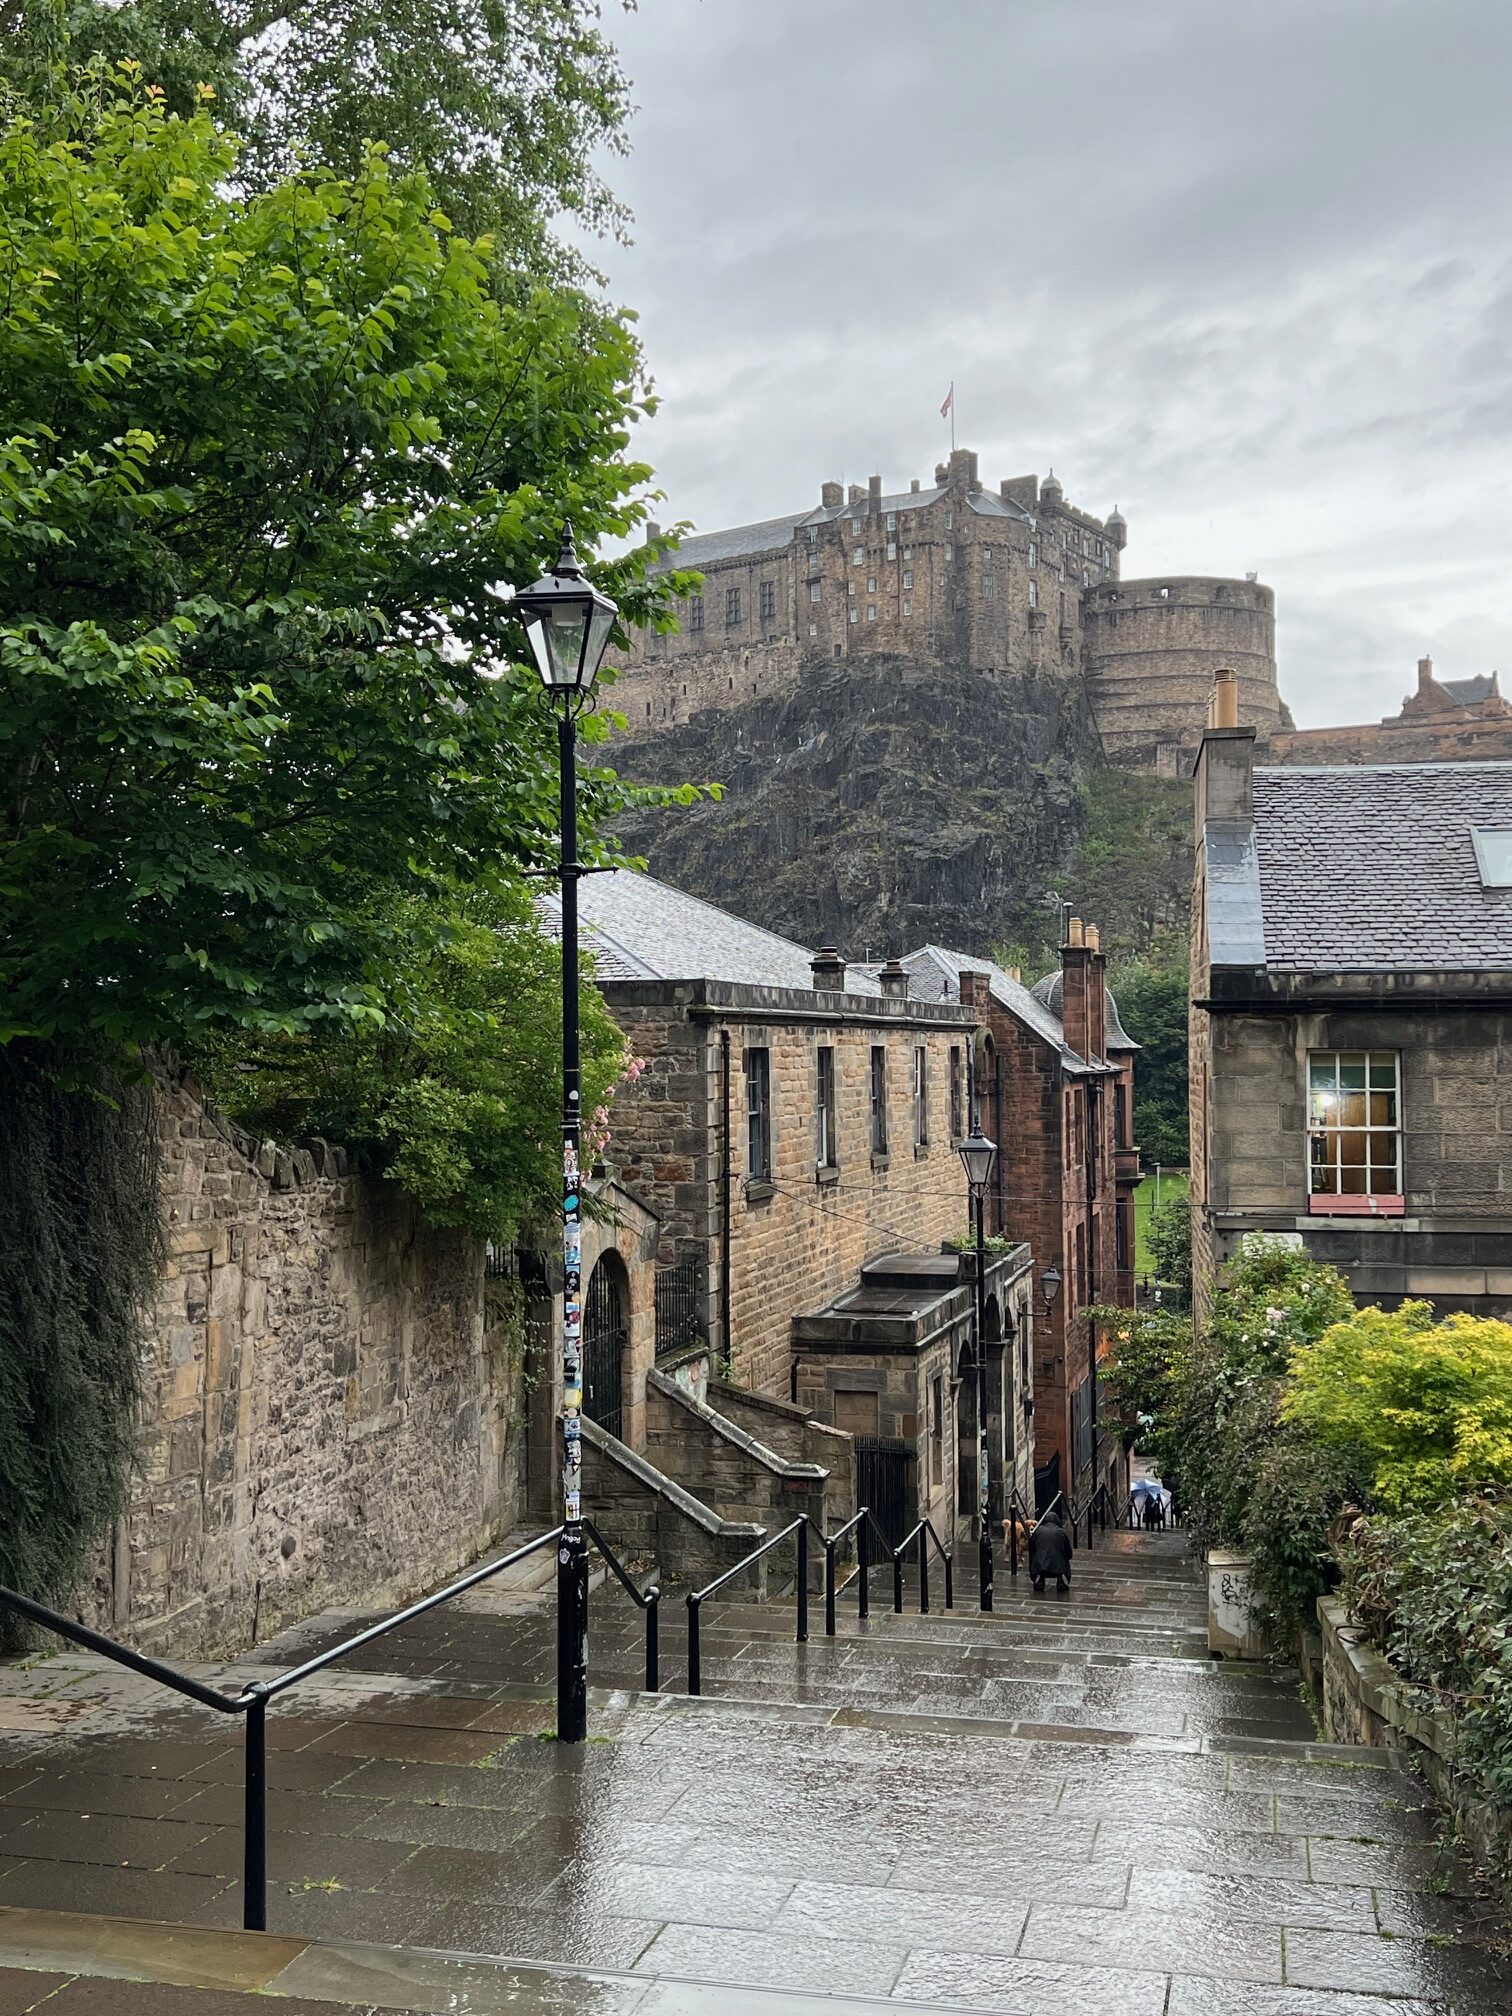 Vennel Viewpoint is a hidden gem with views of the Castle